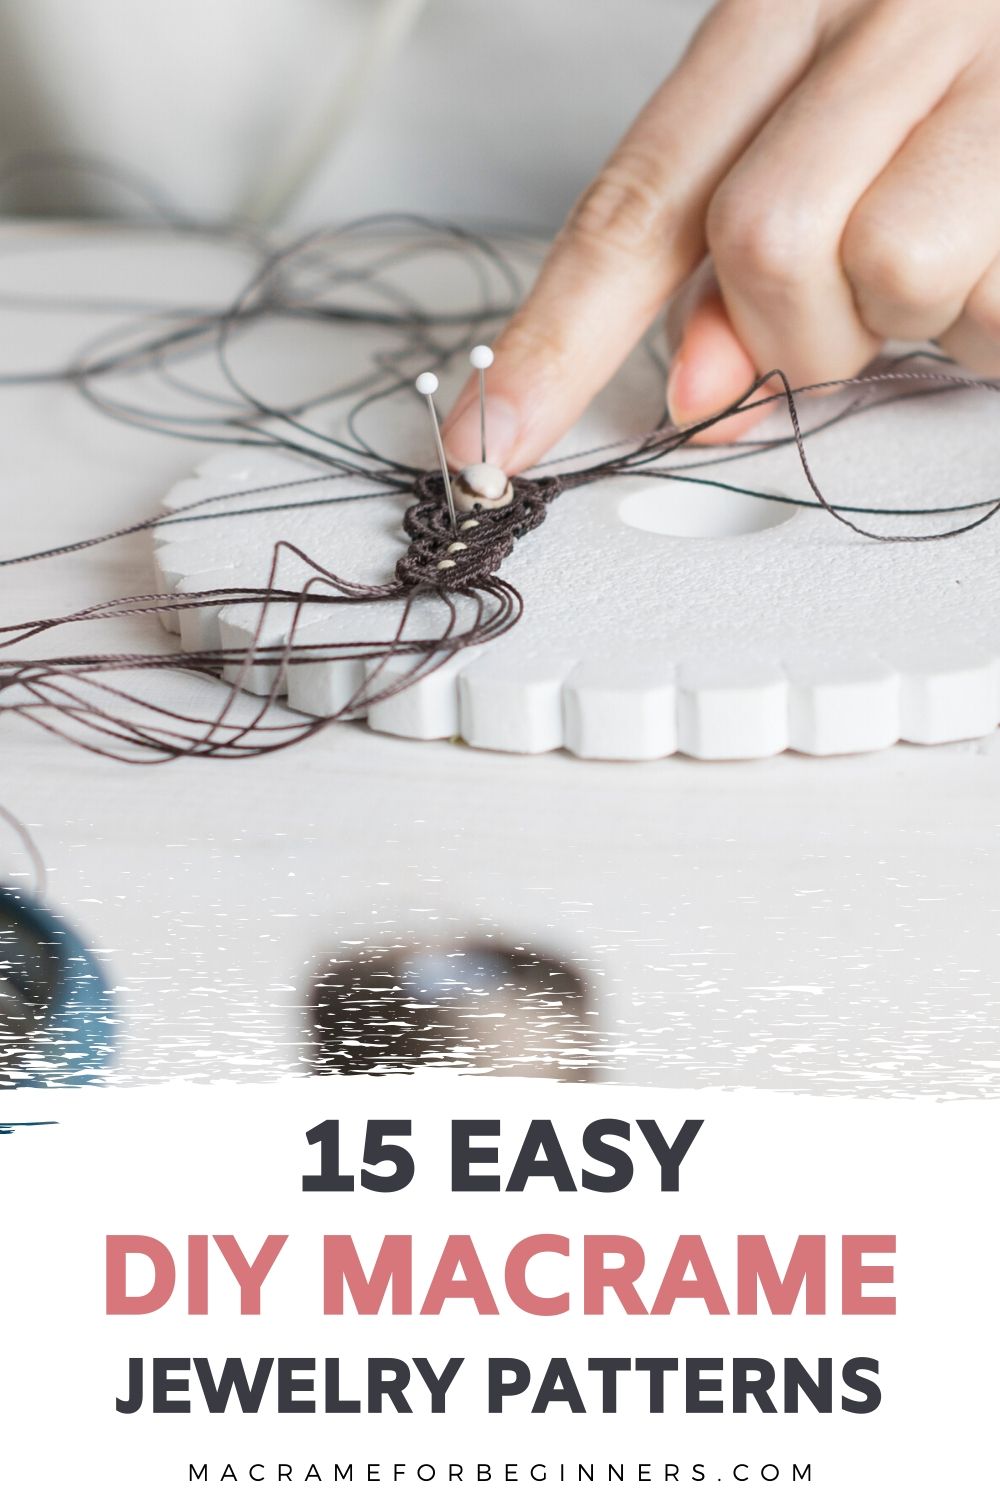 15 Easy DIY Macrame Jewelry Projects for Beginners - Macrame for Beginners